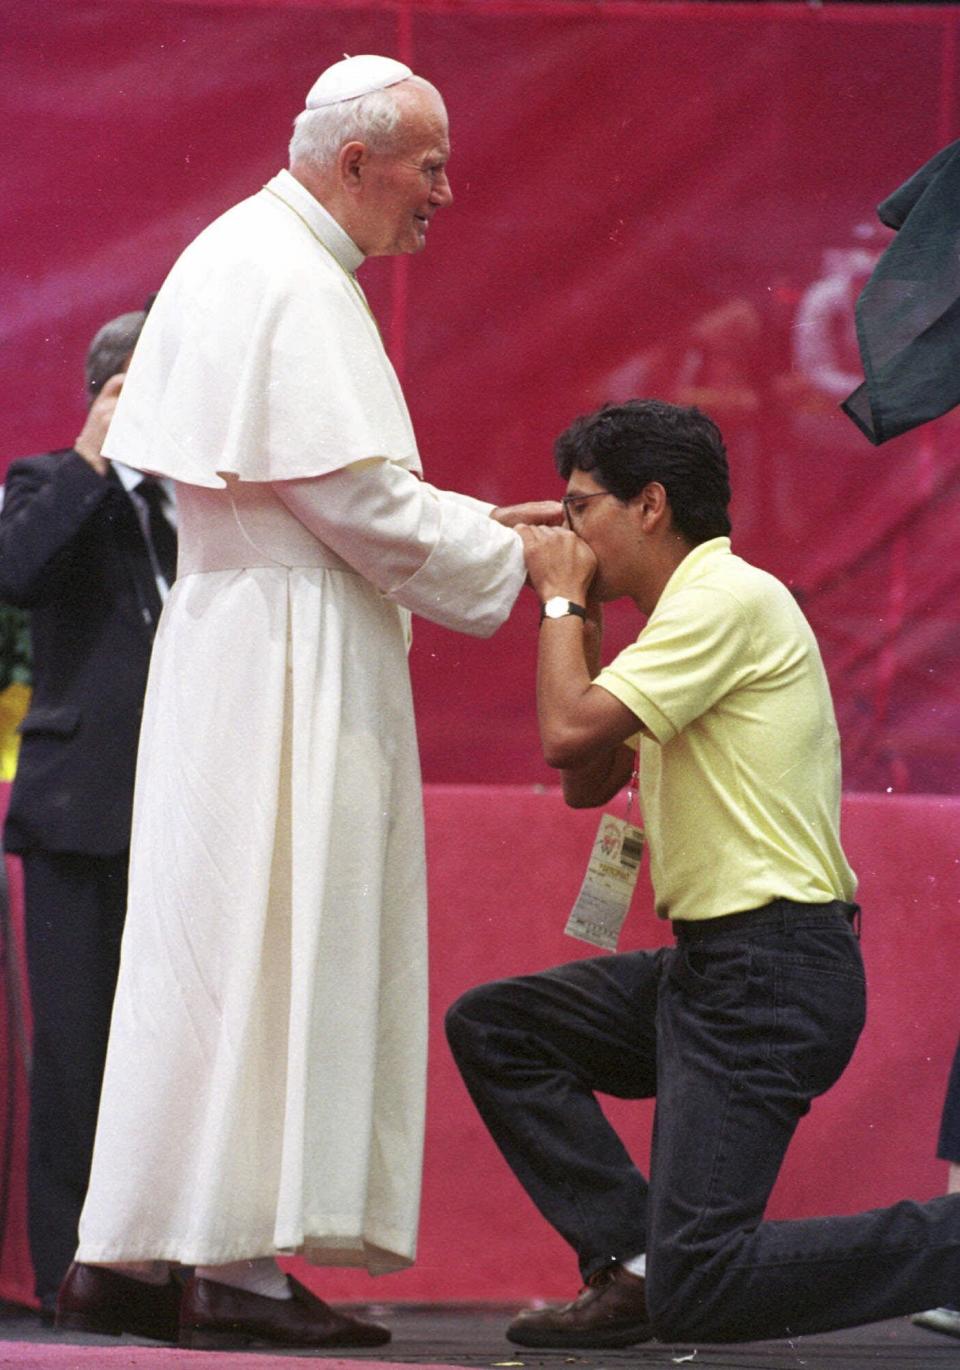 FILE - A World Youth Day participant kisses the ring of Pope John Paul II at Mile High Stadium in Denver on Aug. 12, 1993. (AP Photo/Jeff Robbins, File)